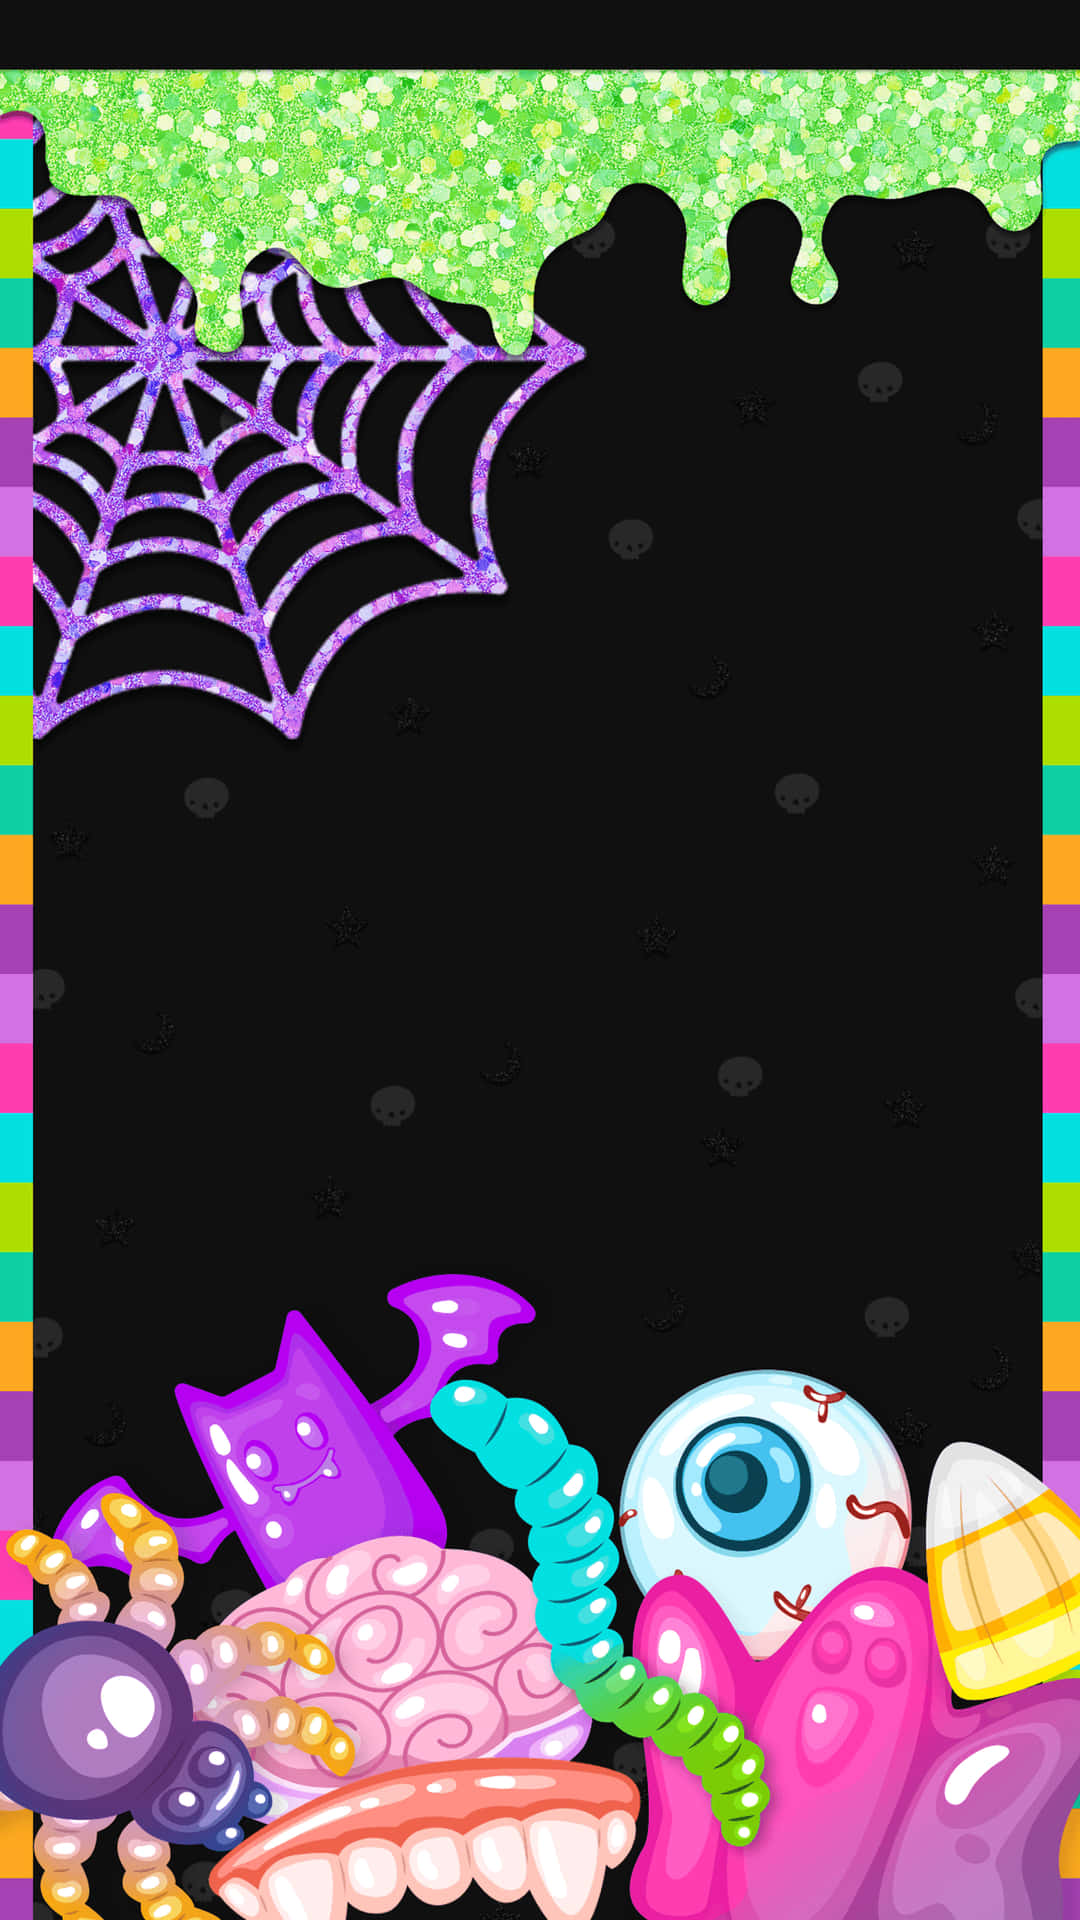 Halloween Frame With Spiders And Other Halloween Decorations Wallpaper